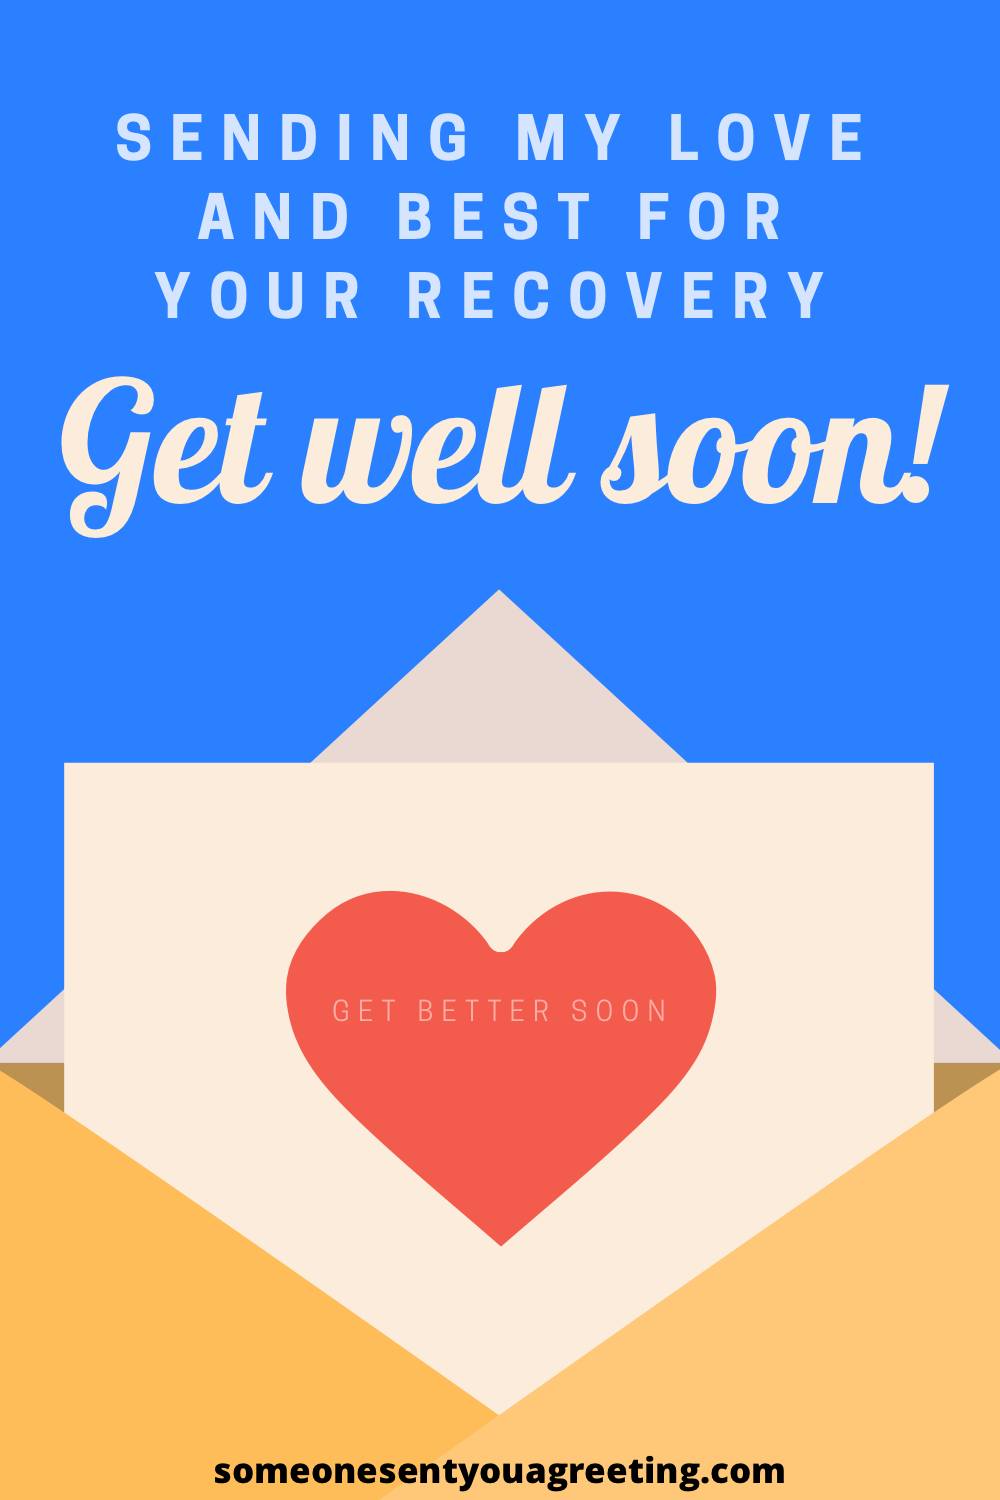 get well soon after heart attack